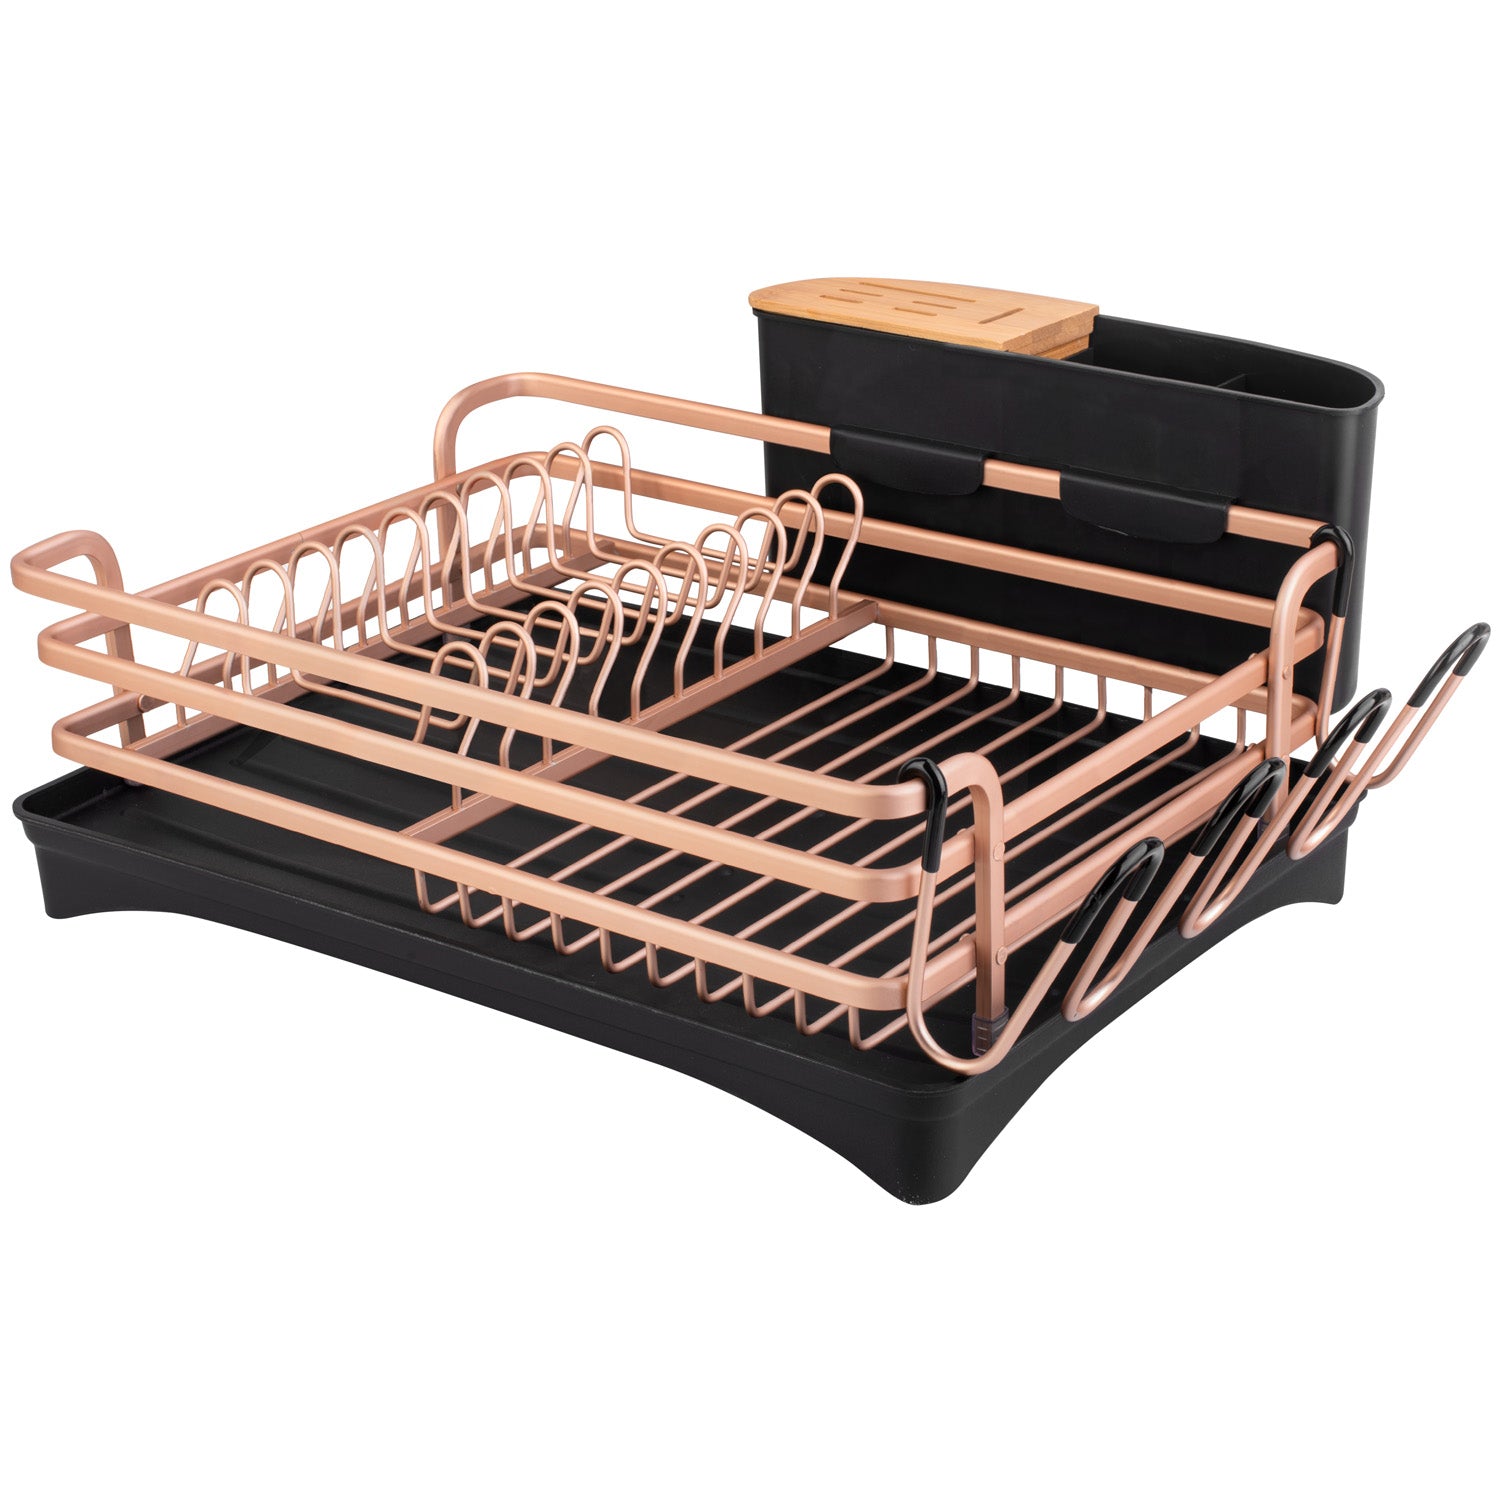 Kitchen Dish Drying Drainer Rack with Drainboard Cup holder - Brilliant  Promos - Be Brilliant!